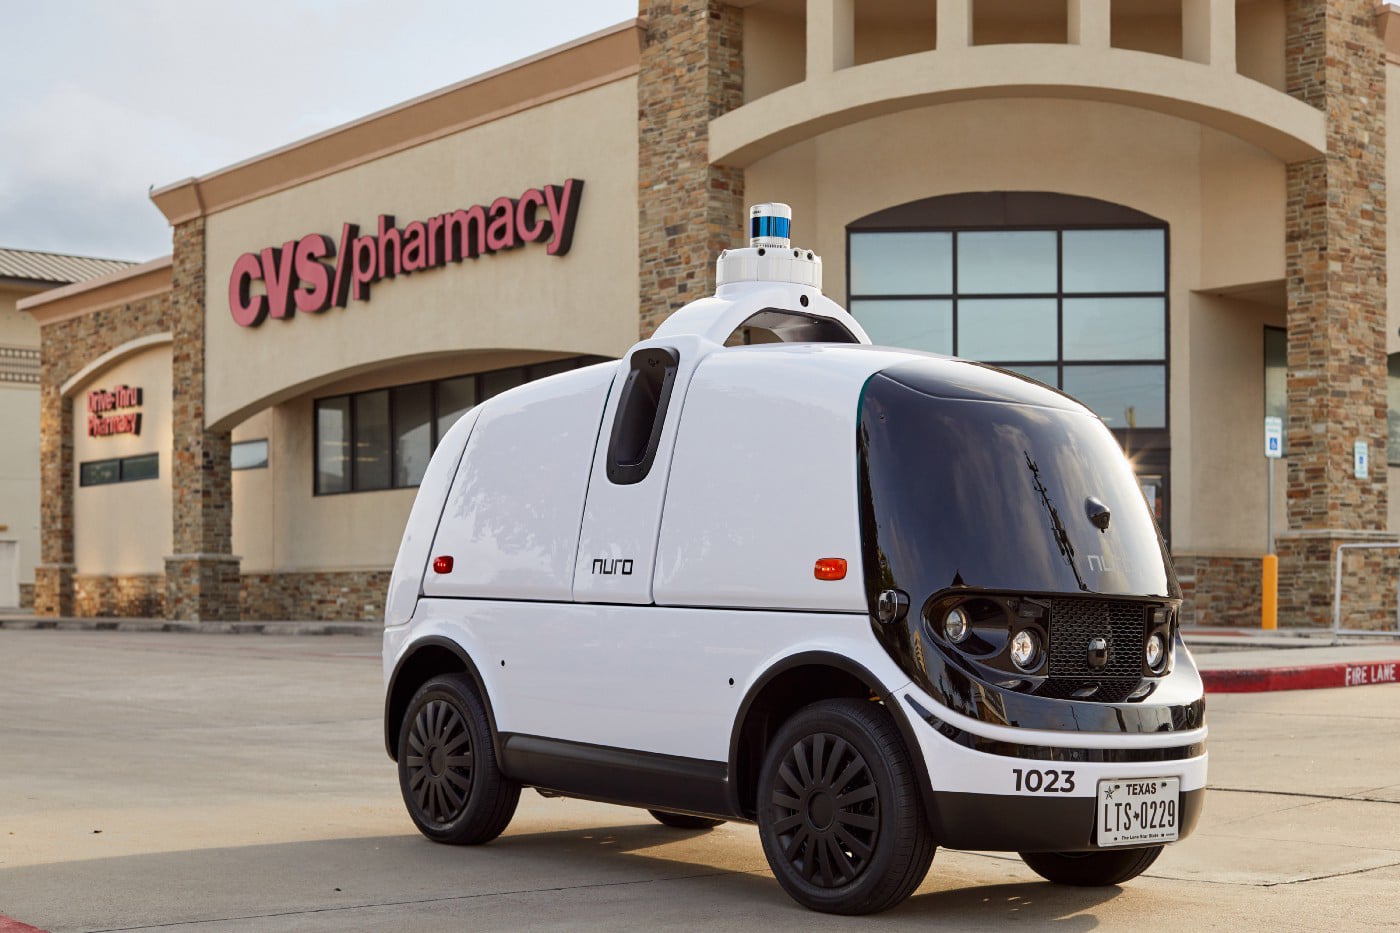 Nuro's self-driving vehicle to deliver CVS Pharmacy prescriptions in Texas.